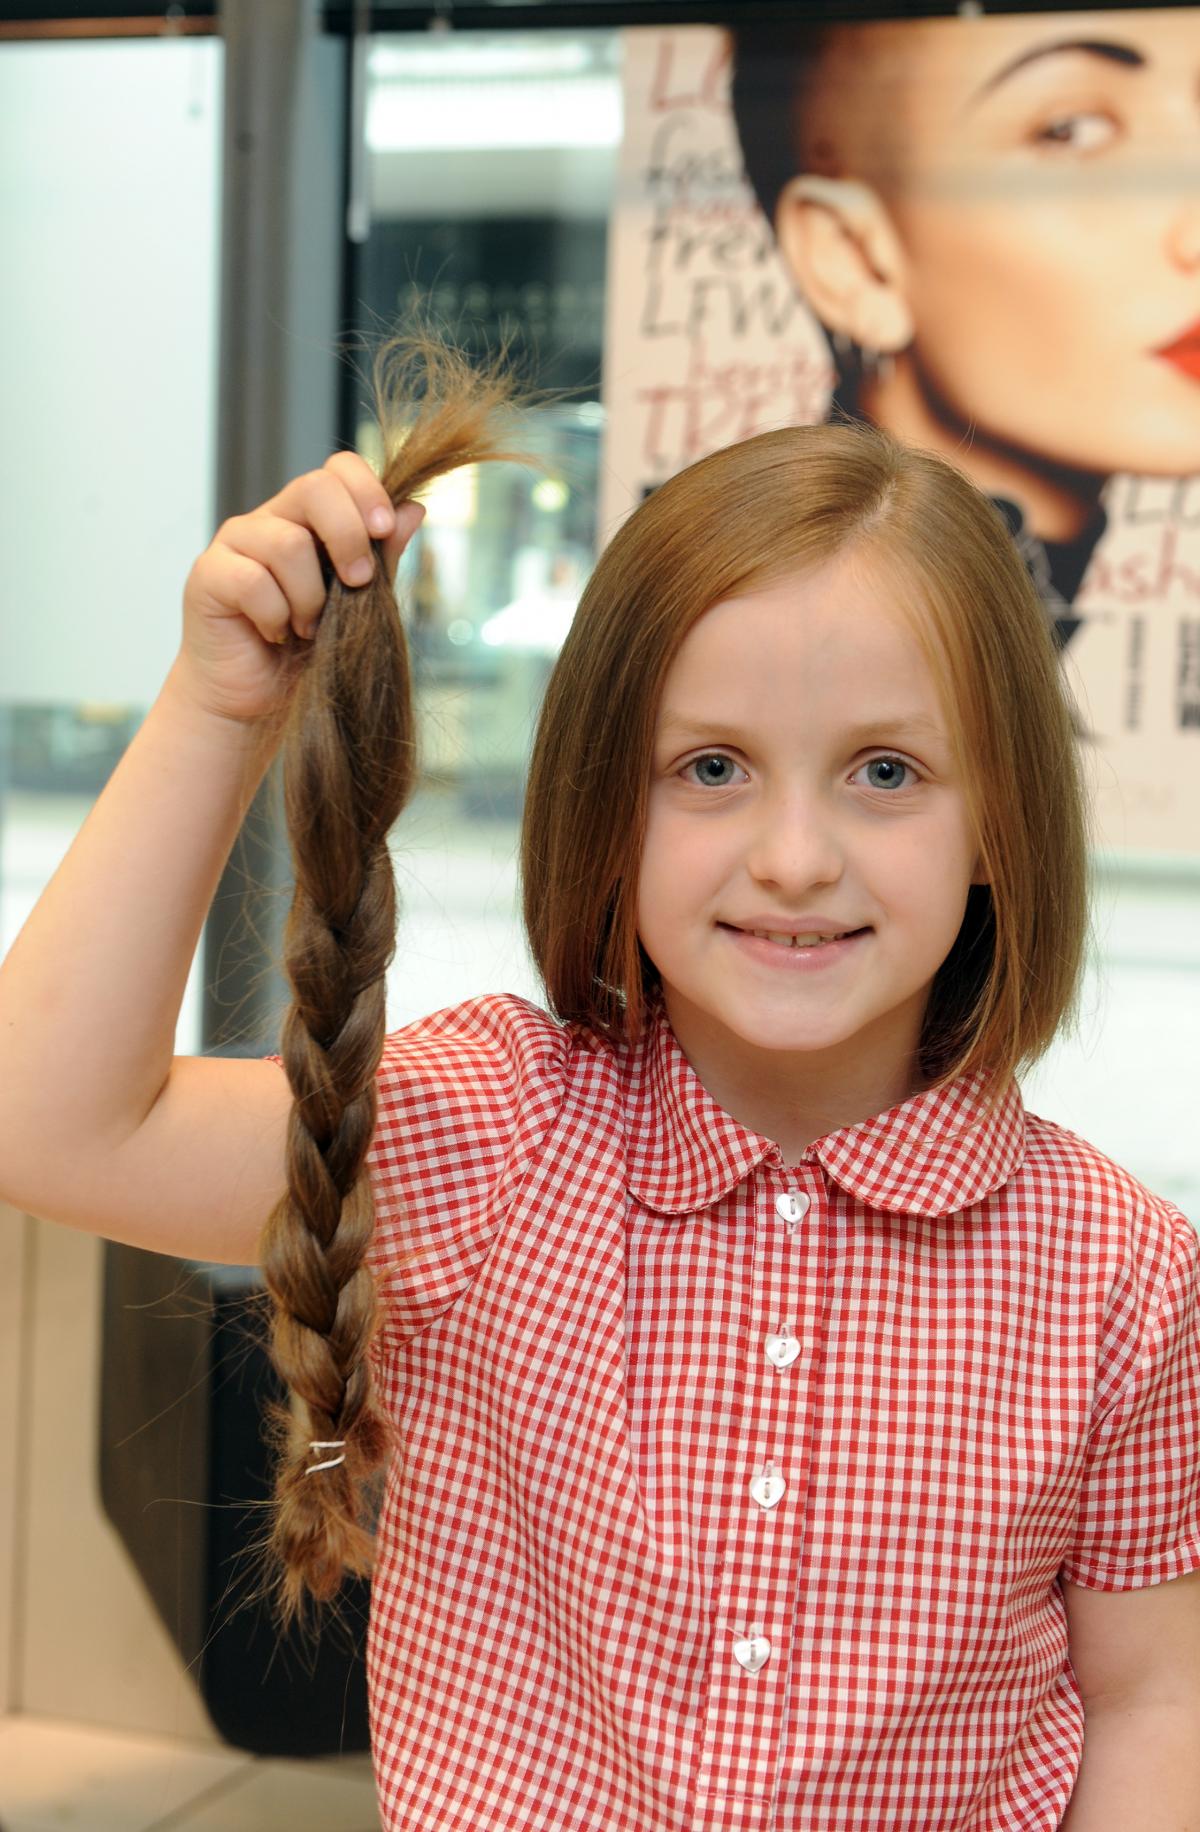 Schoolgirl Has Her Long Locks Cut For Children With Cancer